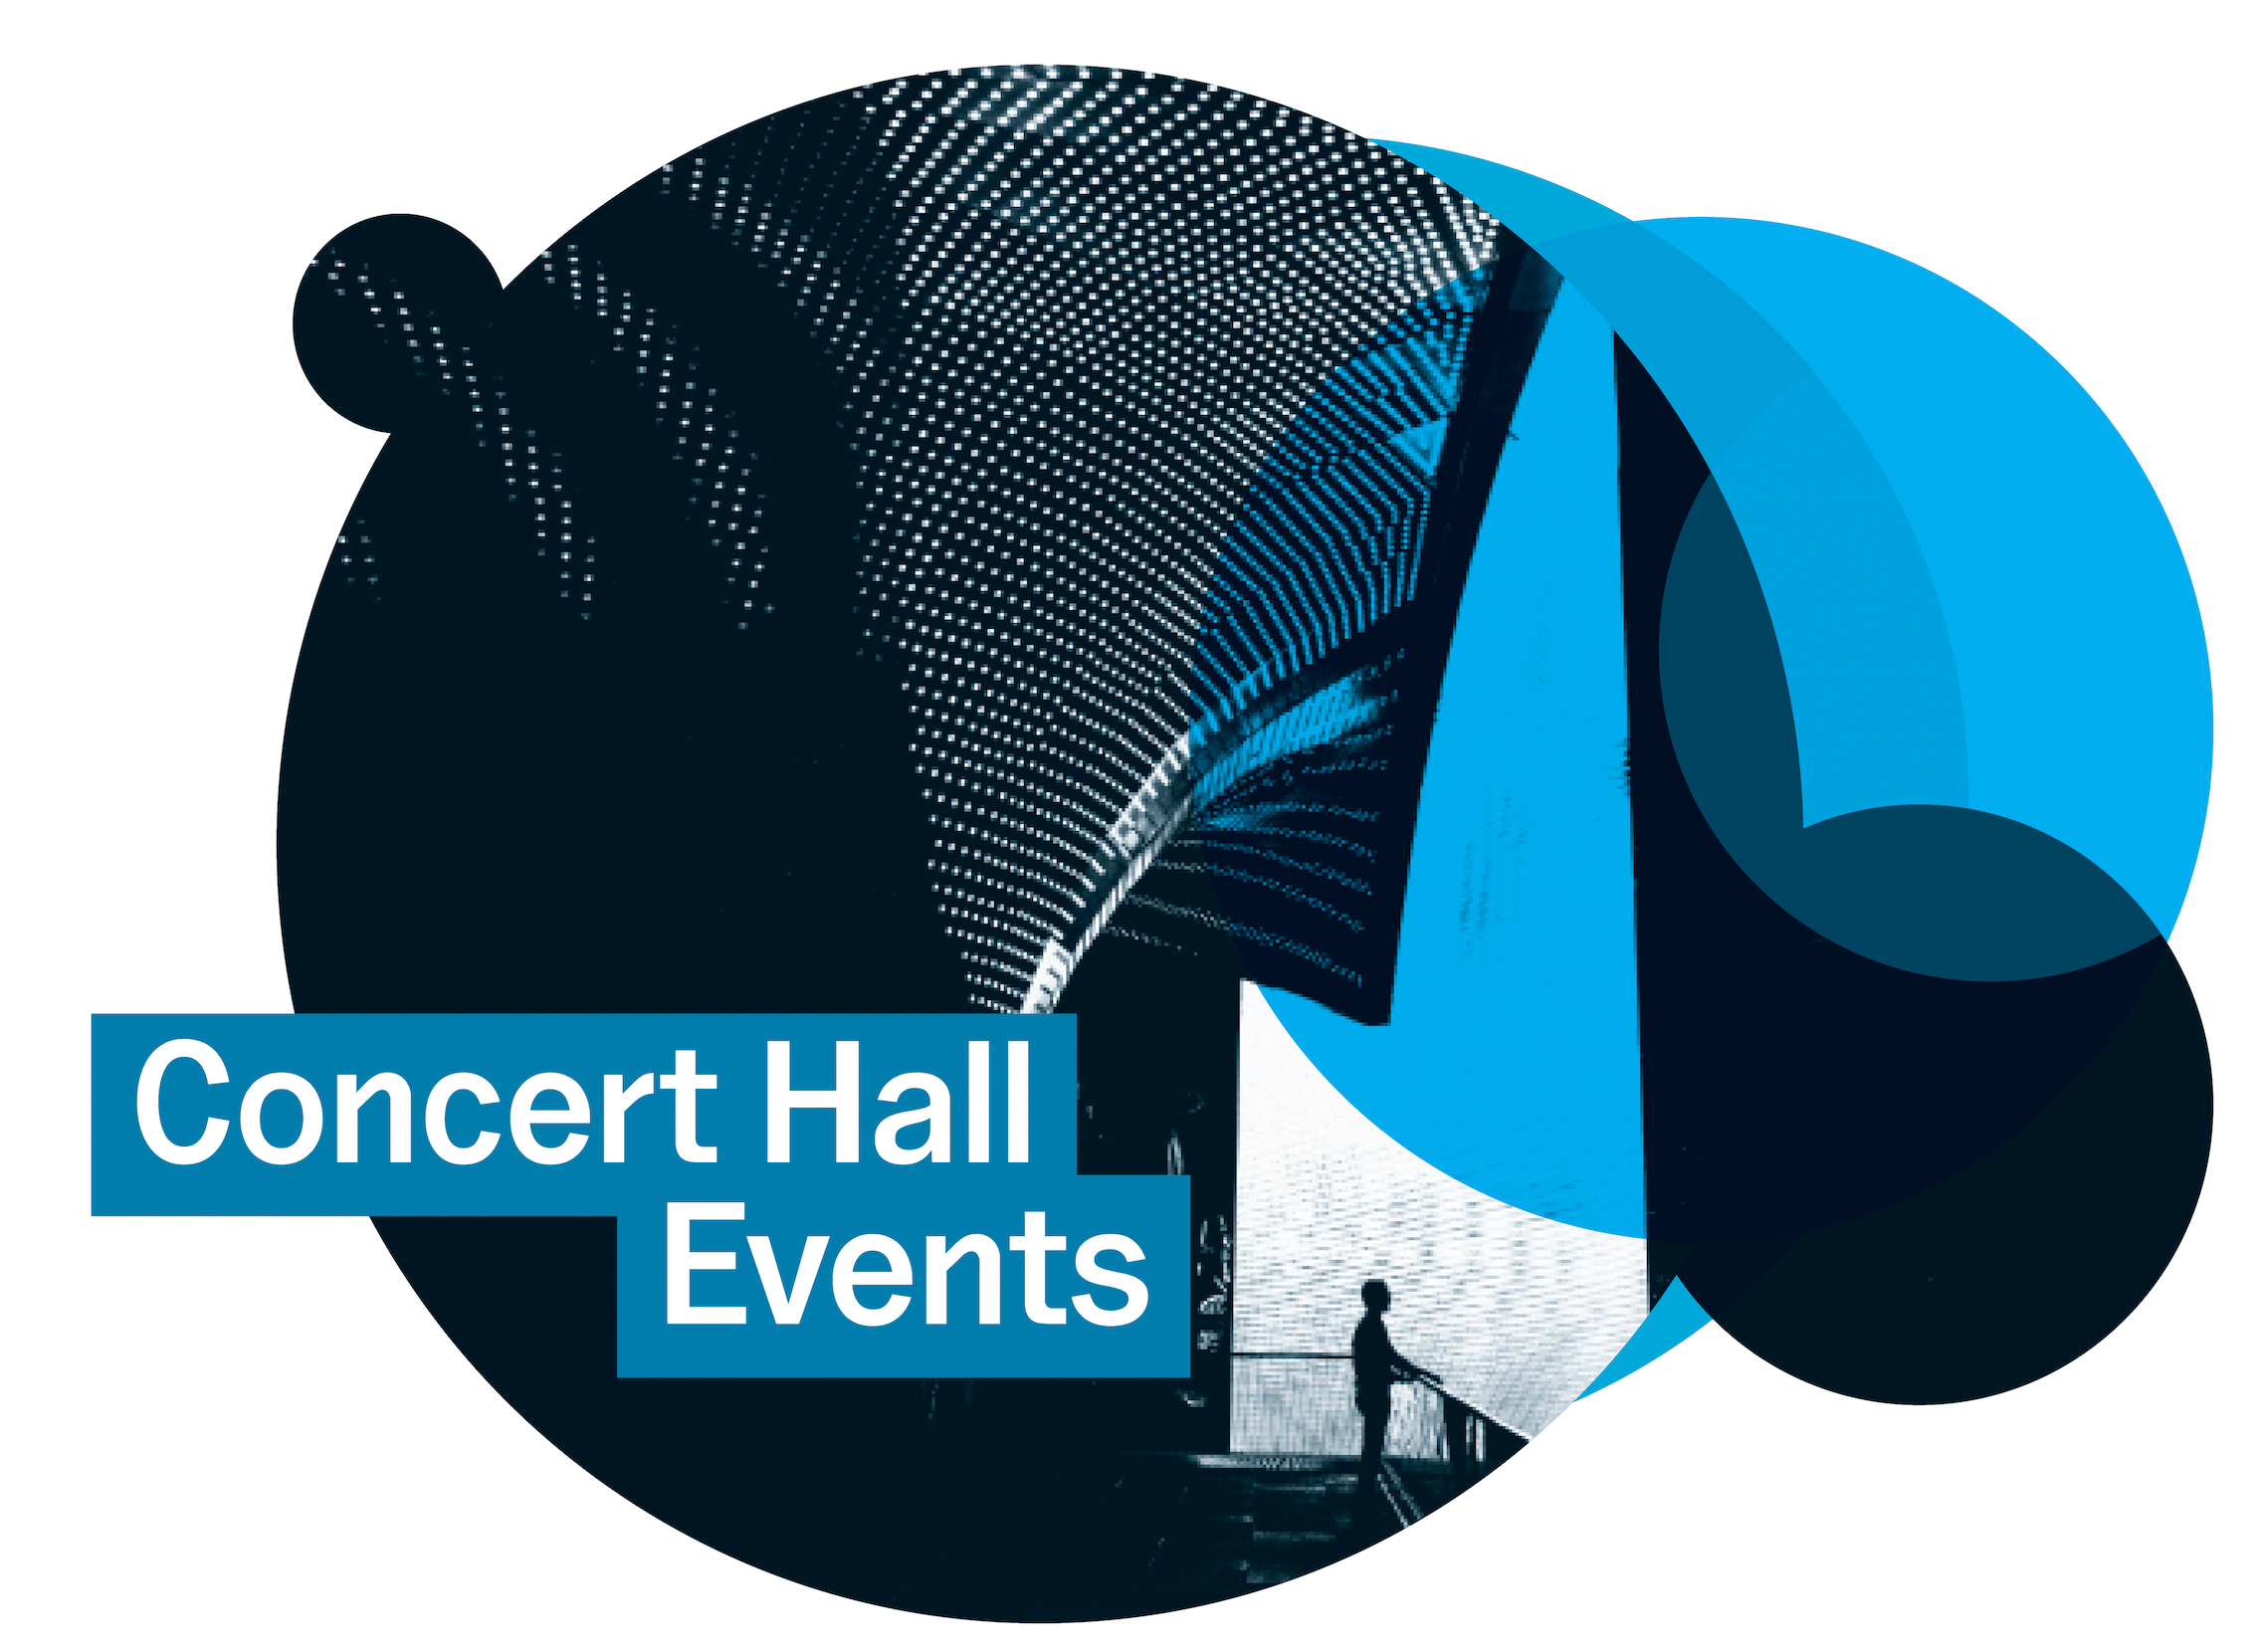 Concert Hall Events